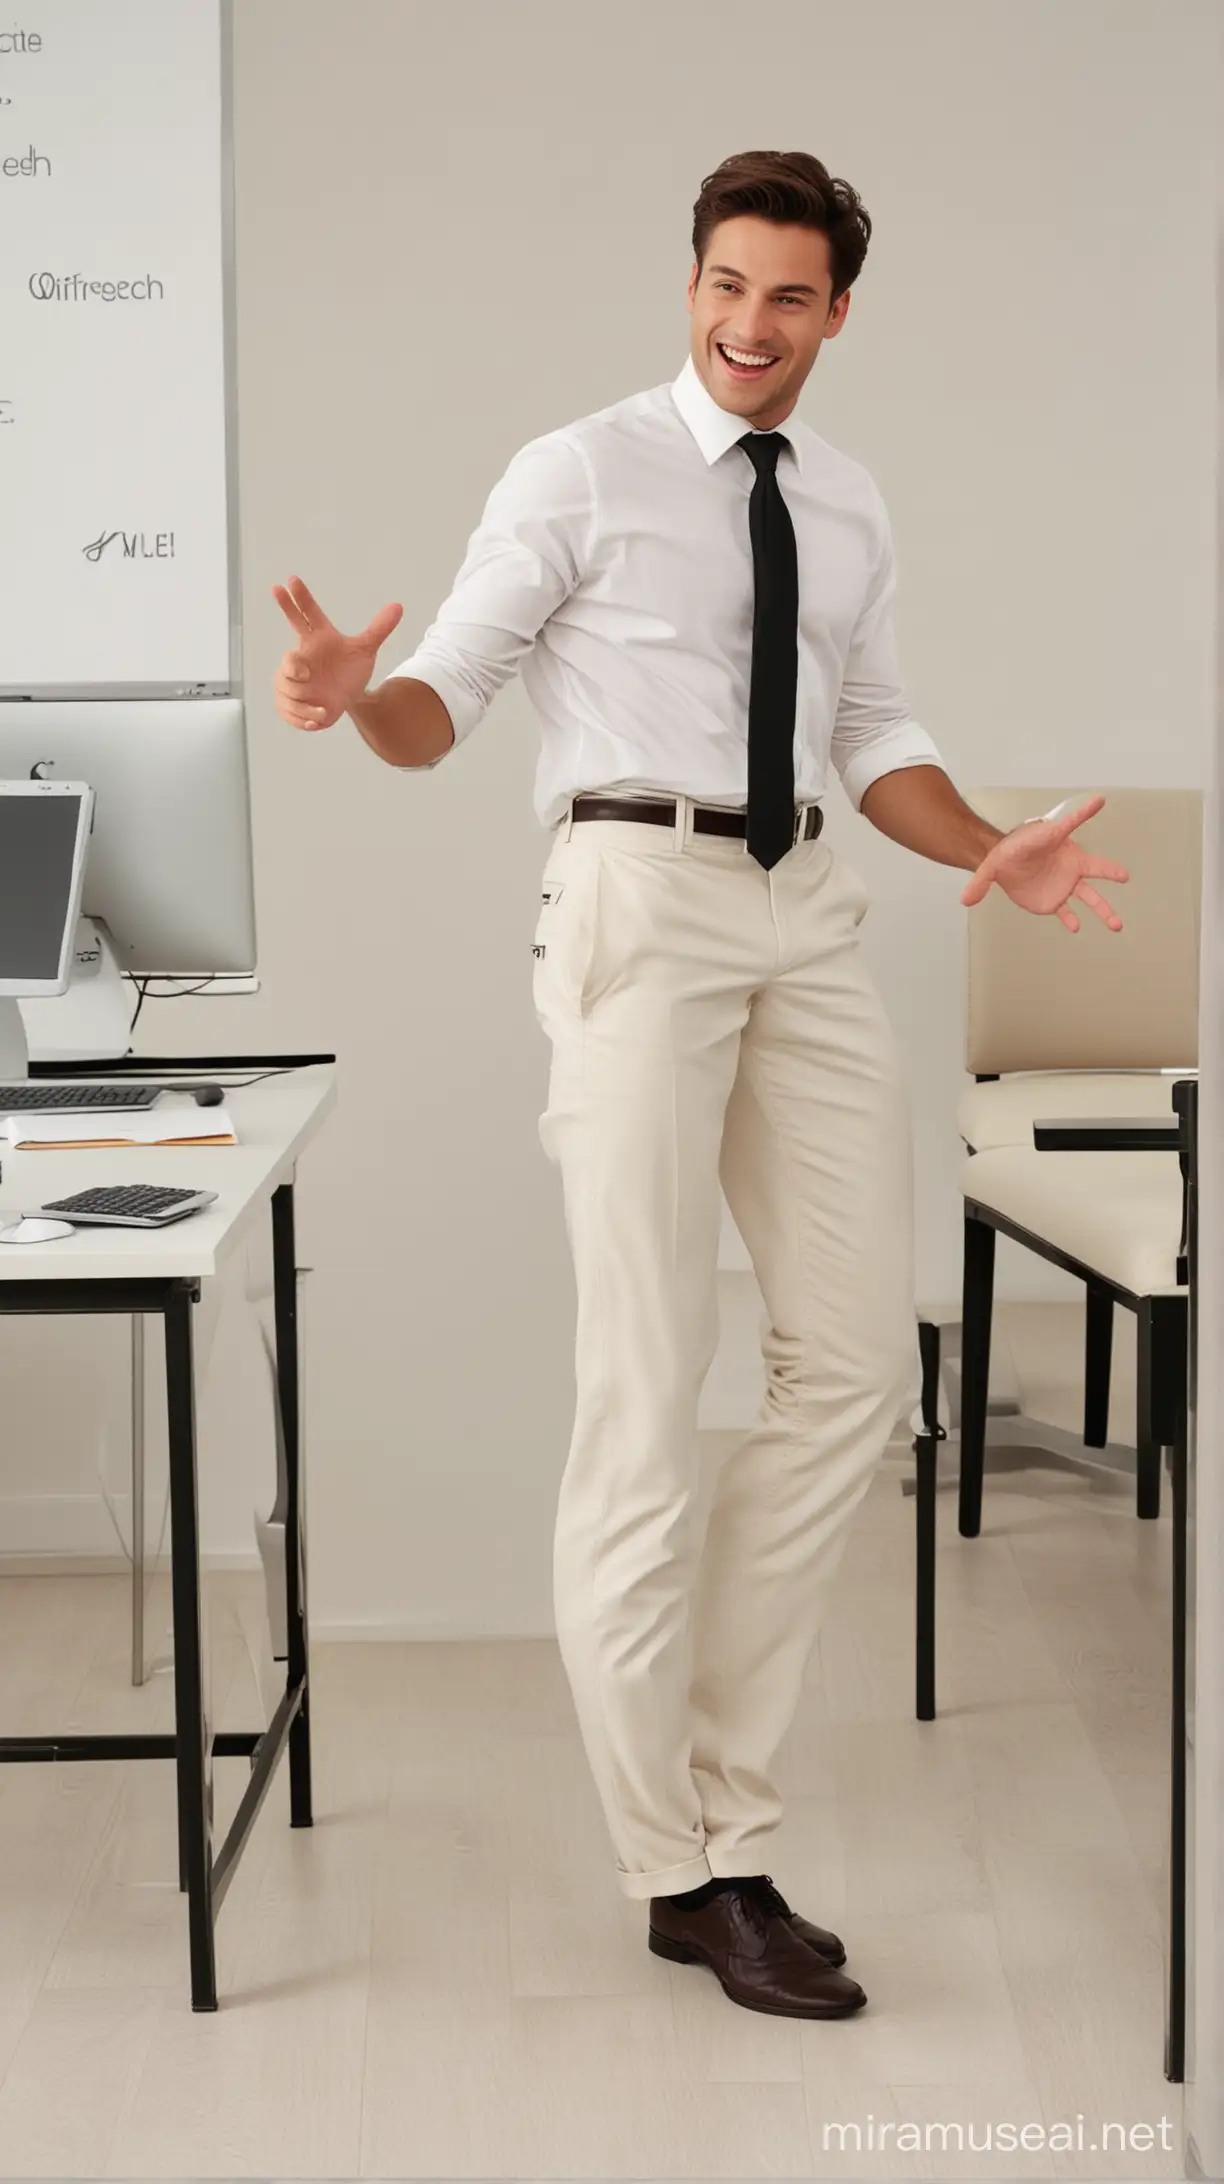 Energetic Young Executive Dancing Joyfully in Monochromatic Office Space